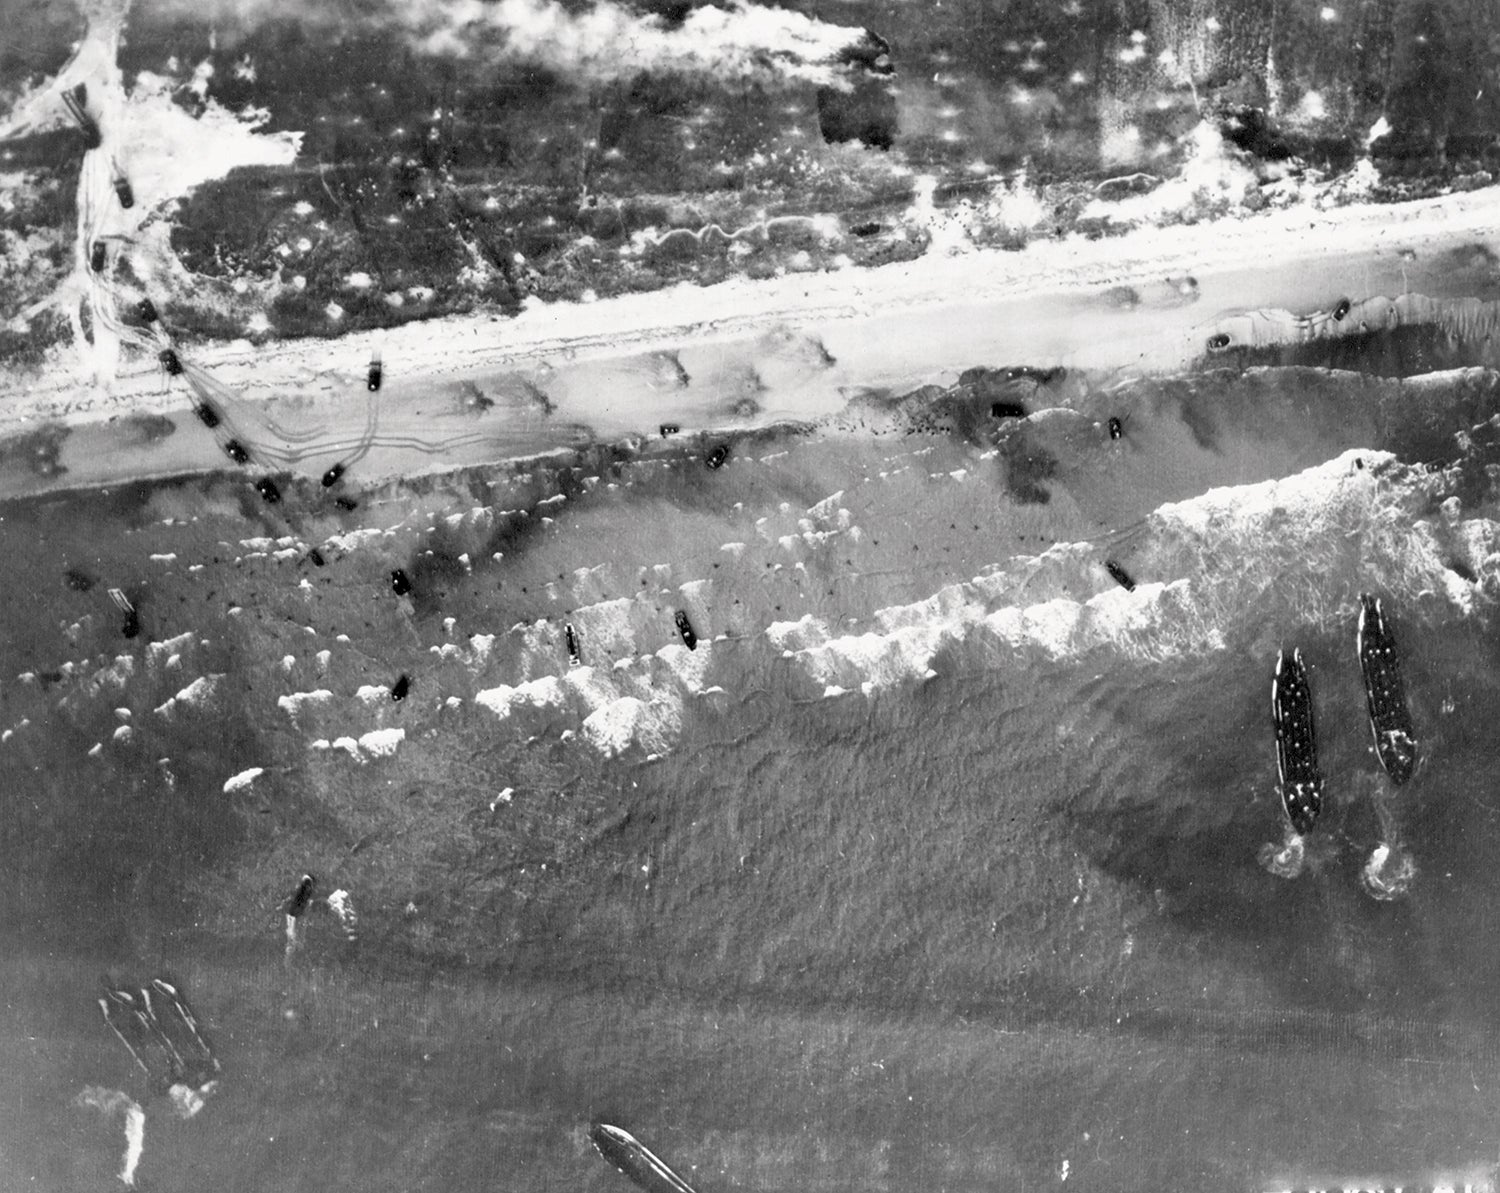 An aerial photograph shows the assault on the Normandy beaches of France on D-Day, June 6, 1944. (Credit: National Archives/U.S. Air Force)